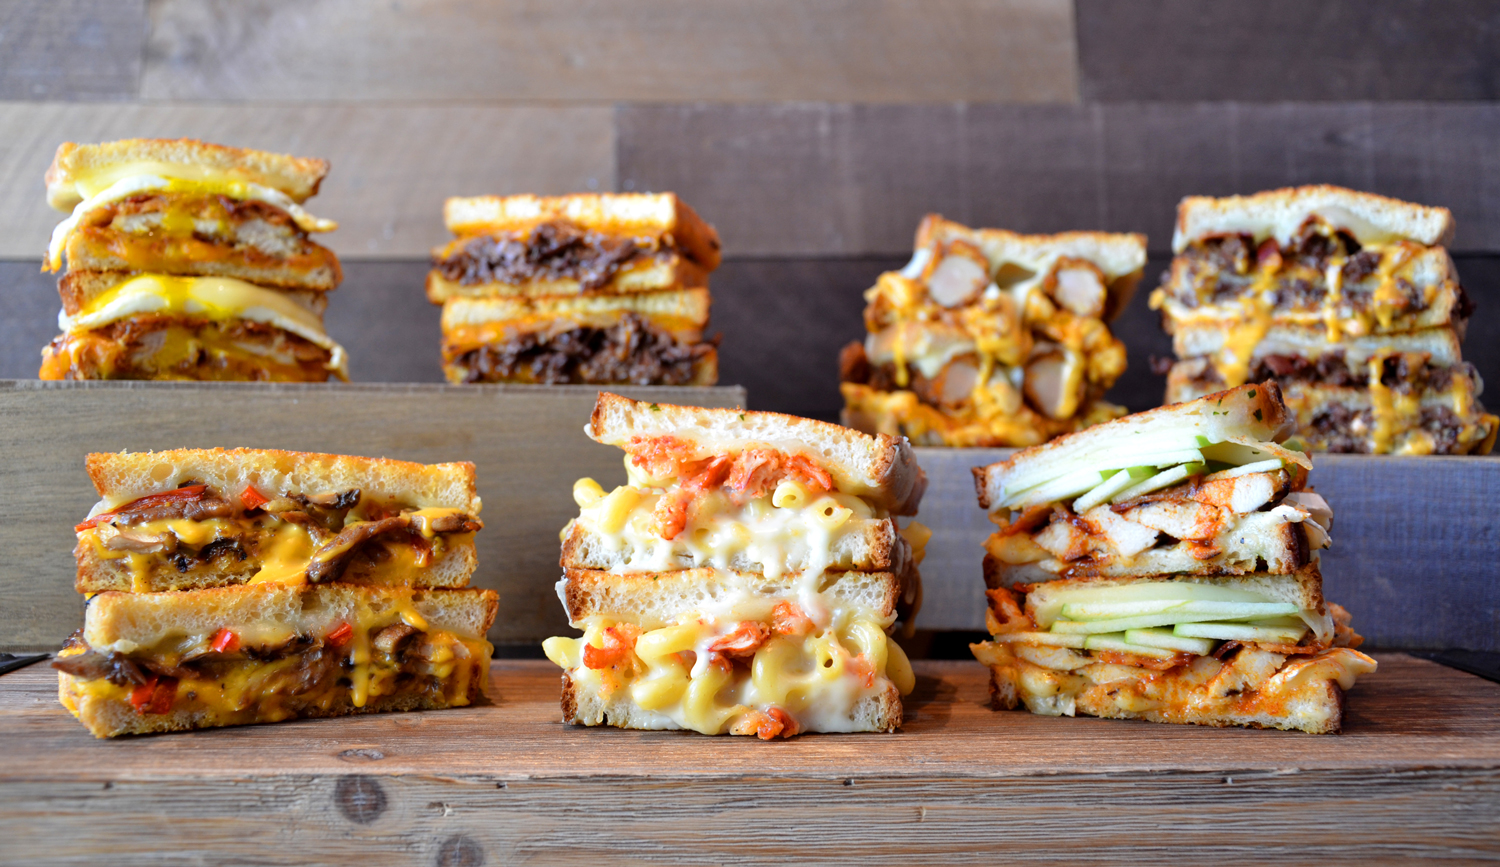 American Grilled Cheese Company Image